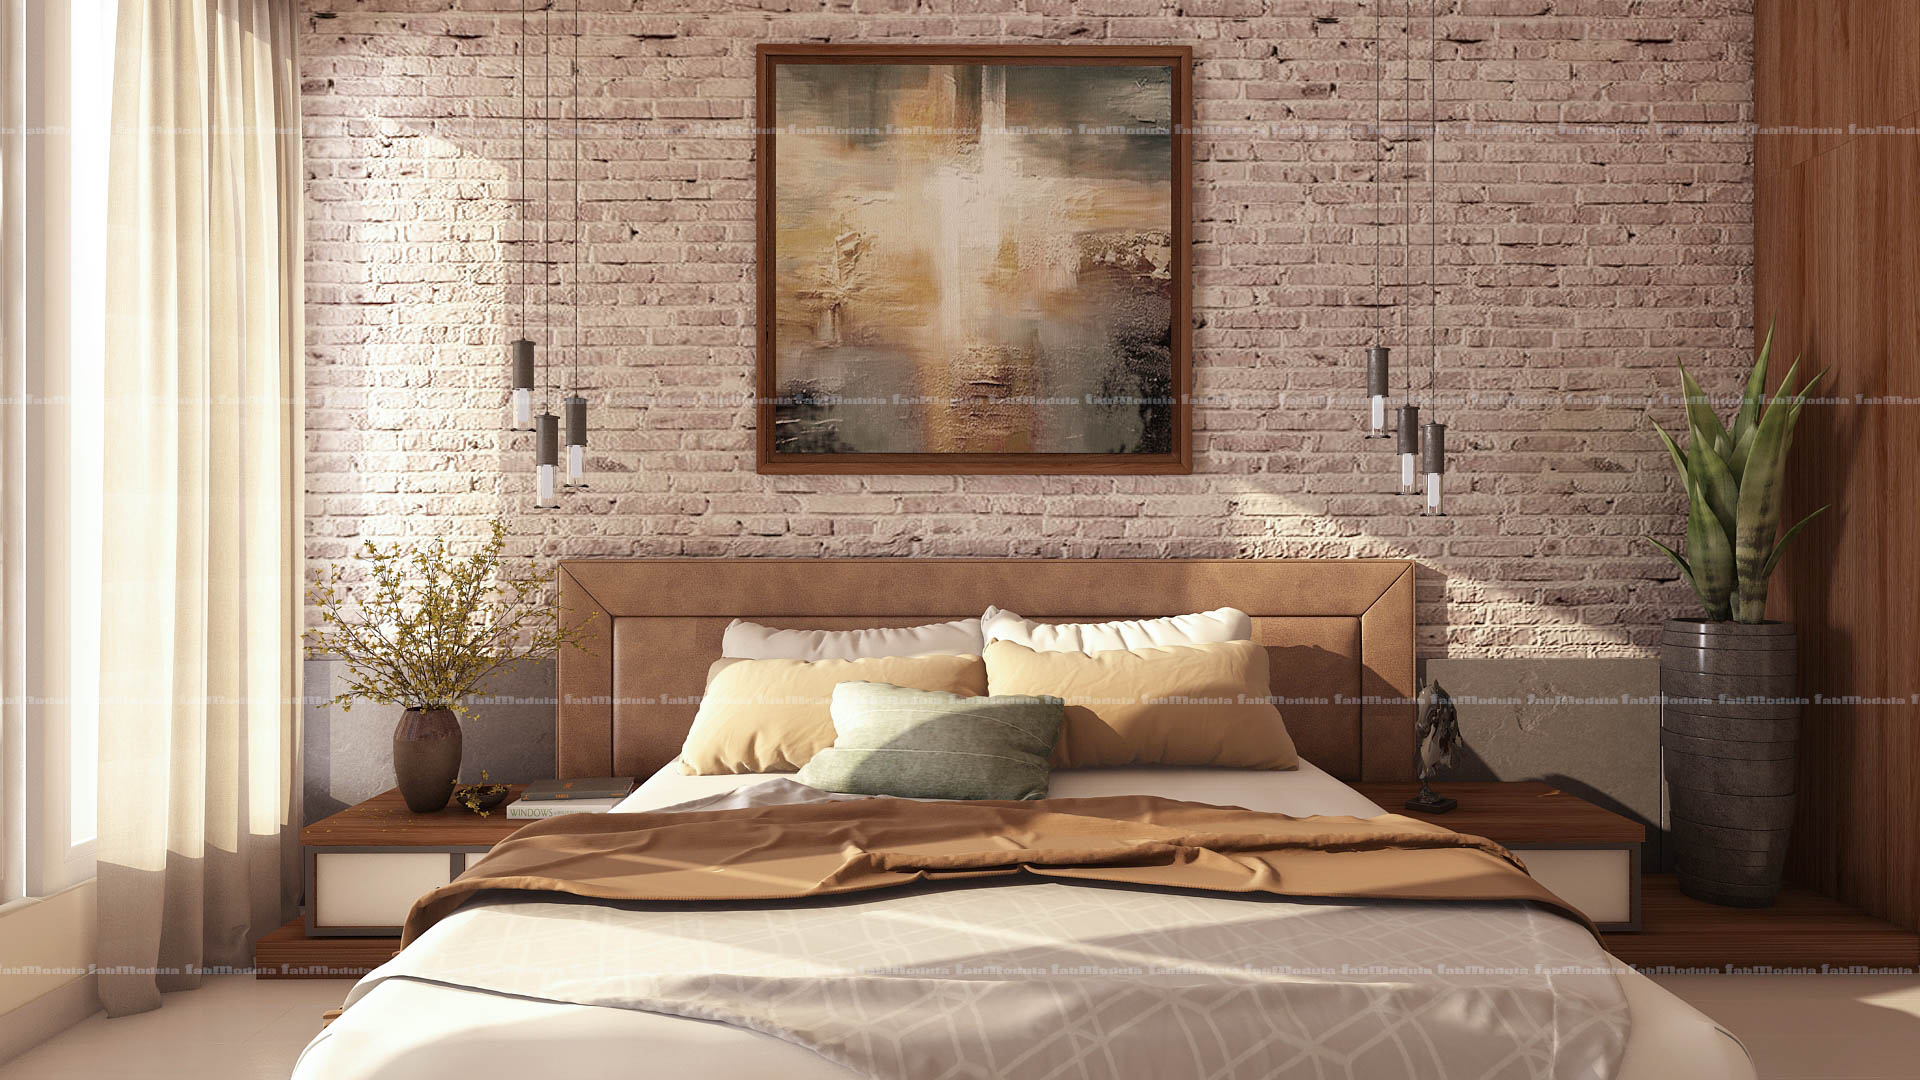 FabModula parents bedroom with  brick themed wall